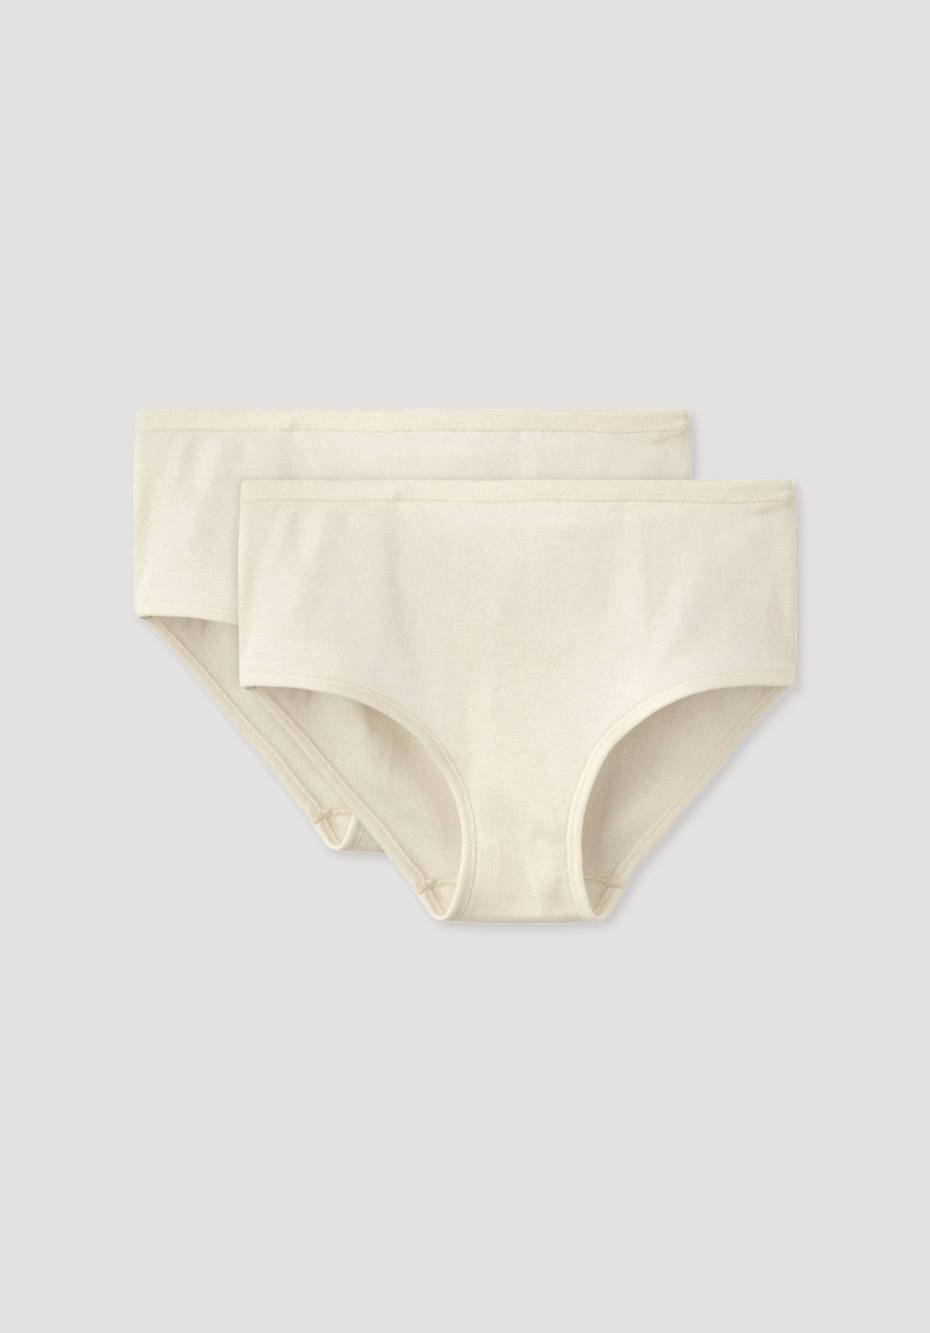 Low cut briefs in a pack of 2 PURE NATURE made from pure organic